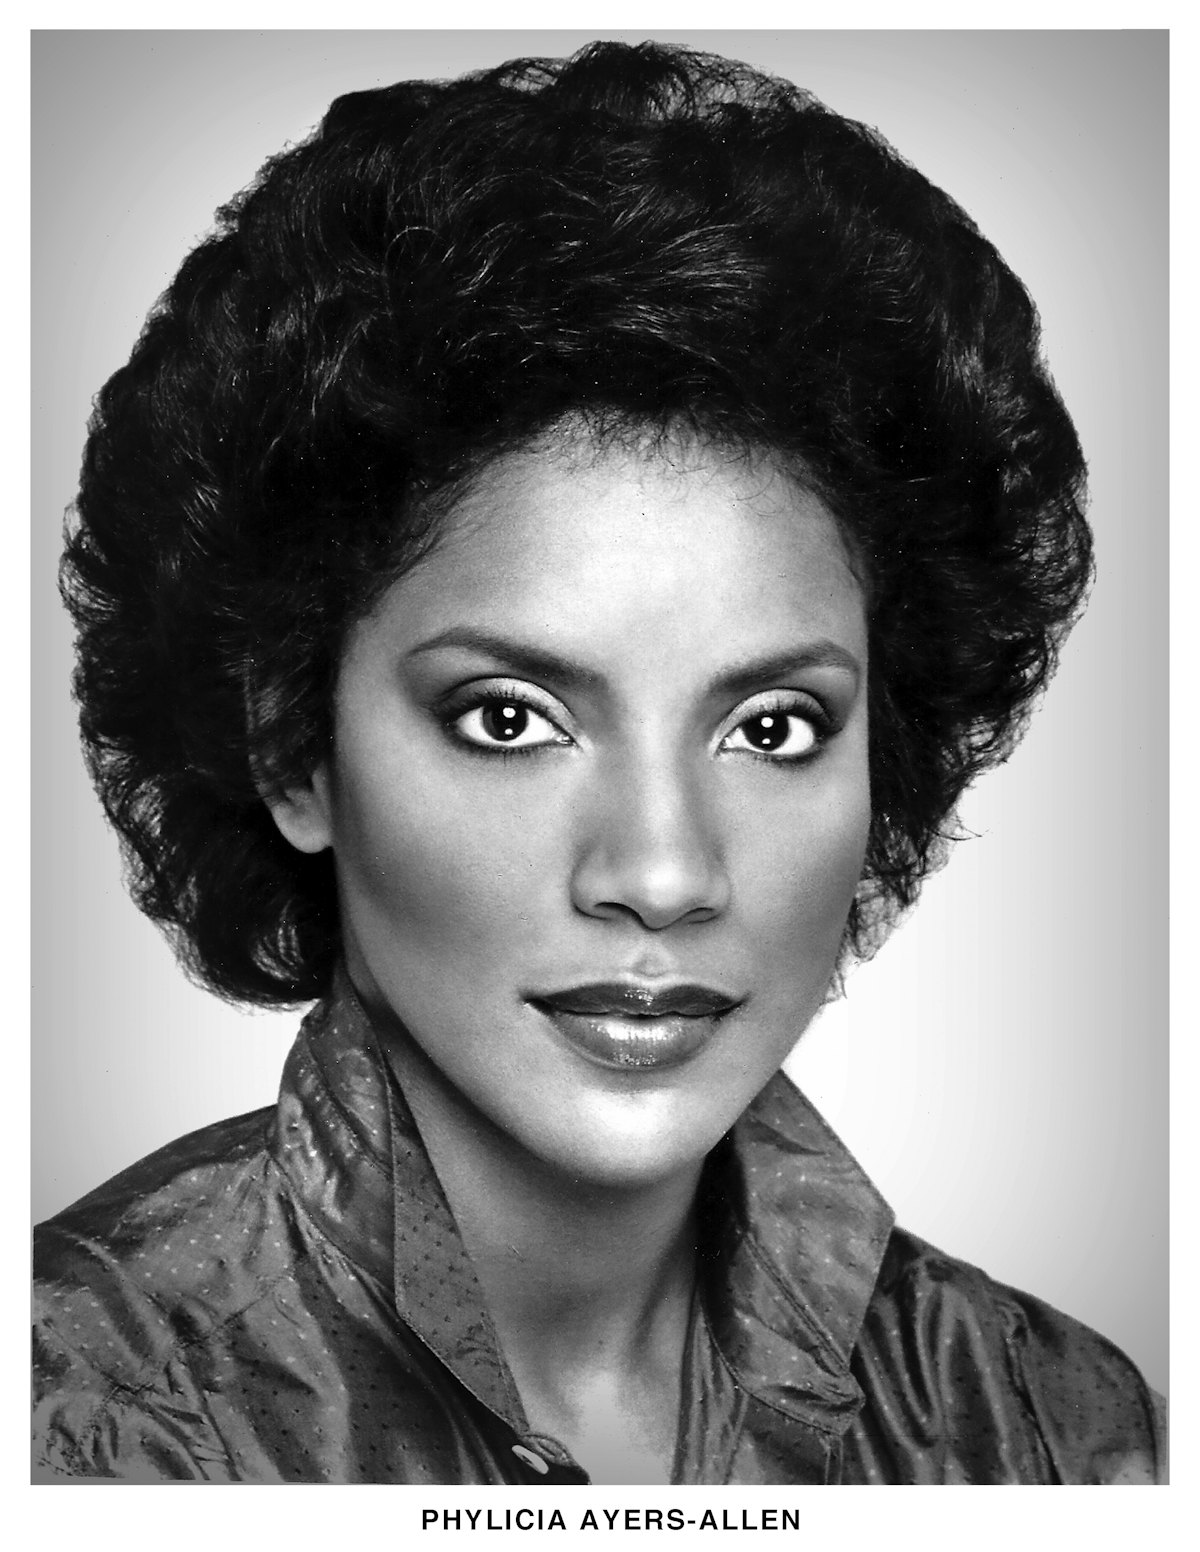 Phylicia Rashad, then Patricia Ayers-Allen, pictured in a headshot from 1975